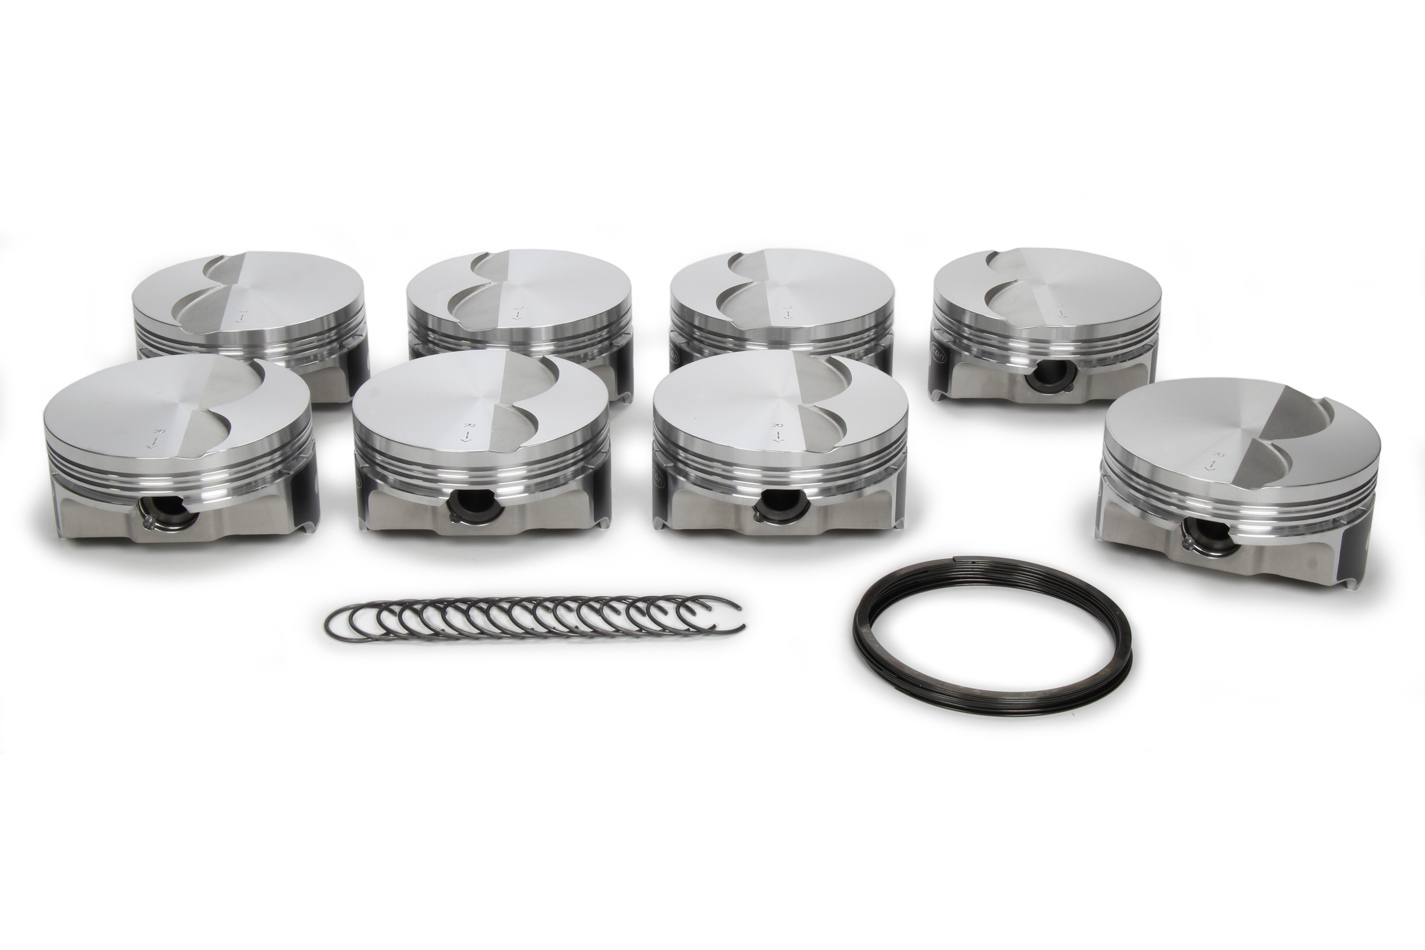 Icon Pistons IC9991C.020 Piston, FHR, Forged, 4.020 in Bore, 1.5 x 1.5 x 3.0 mm Ring Groove, Minus 3.30 cc, GM LS-Series, Set of 8